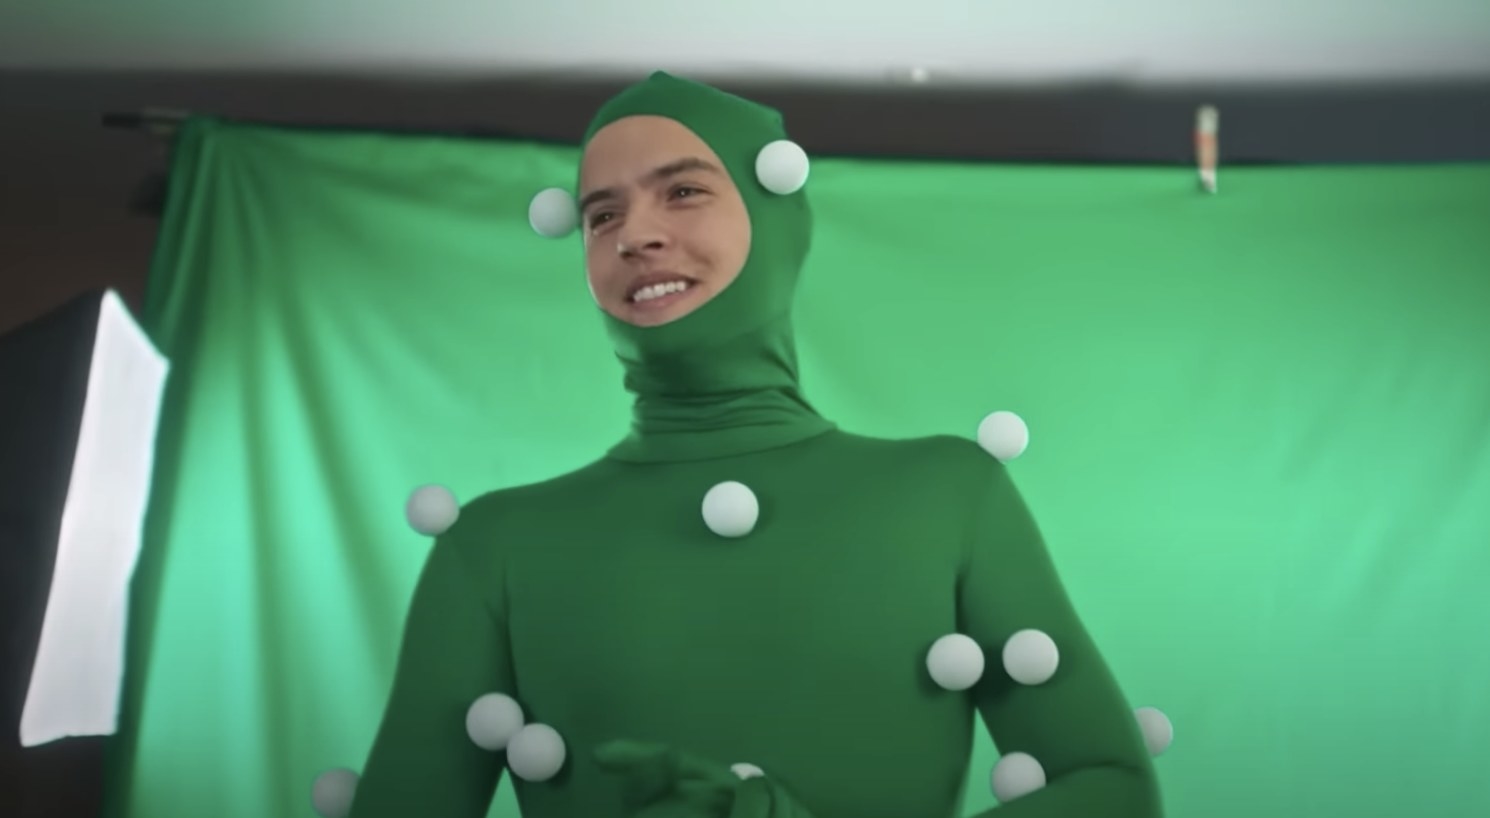 Dylan Sprouse in a motion capture suit in front of a green screen